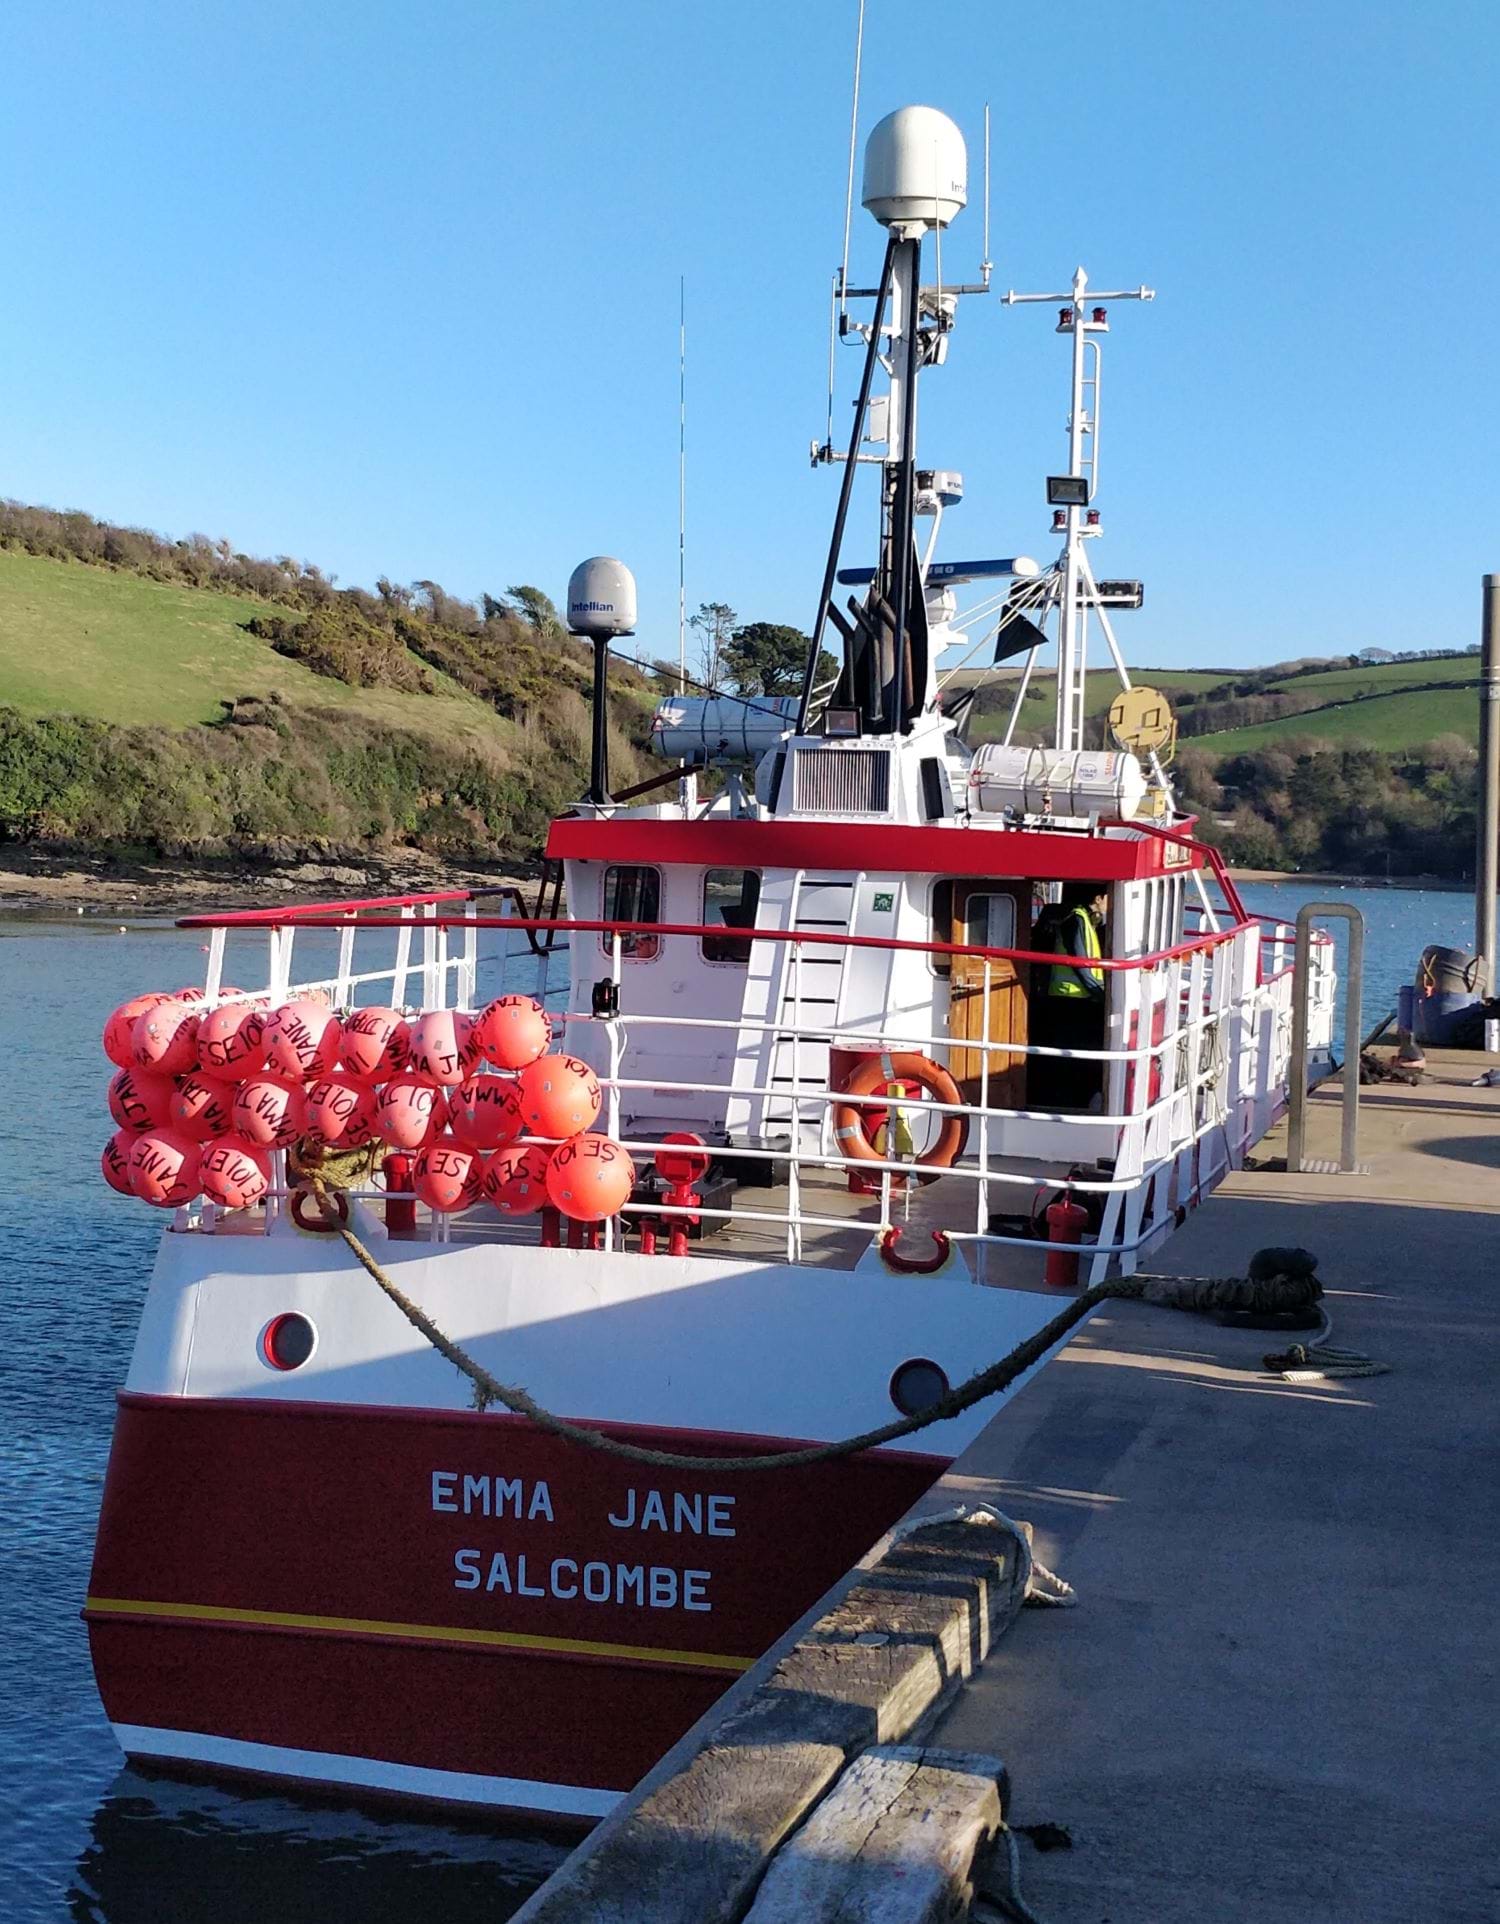 An image of a docked fishing vessel named the Emma Jane Salcombe